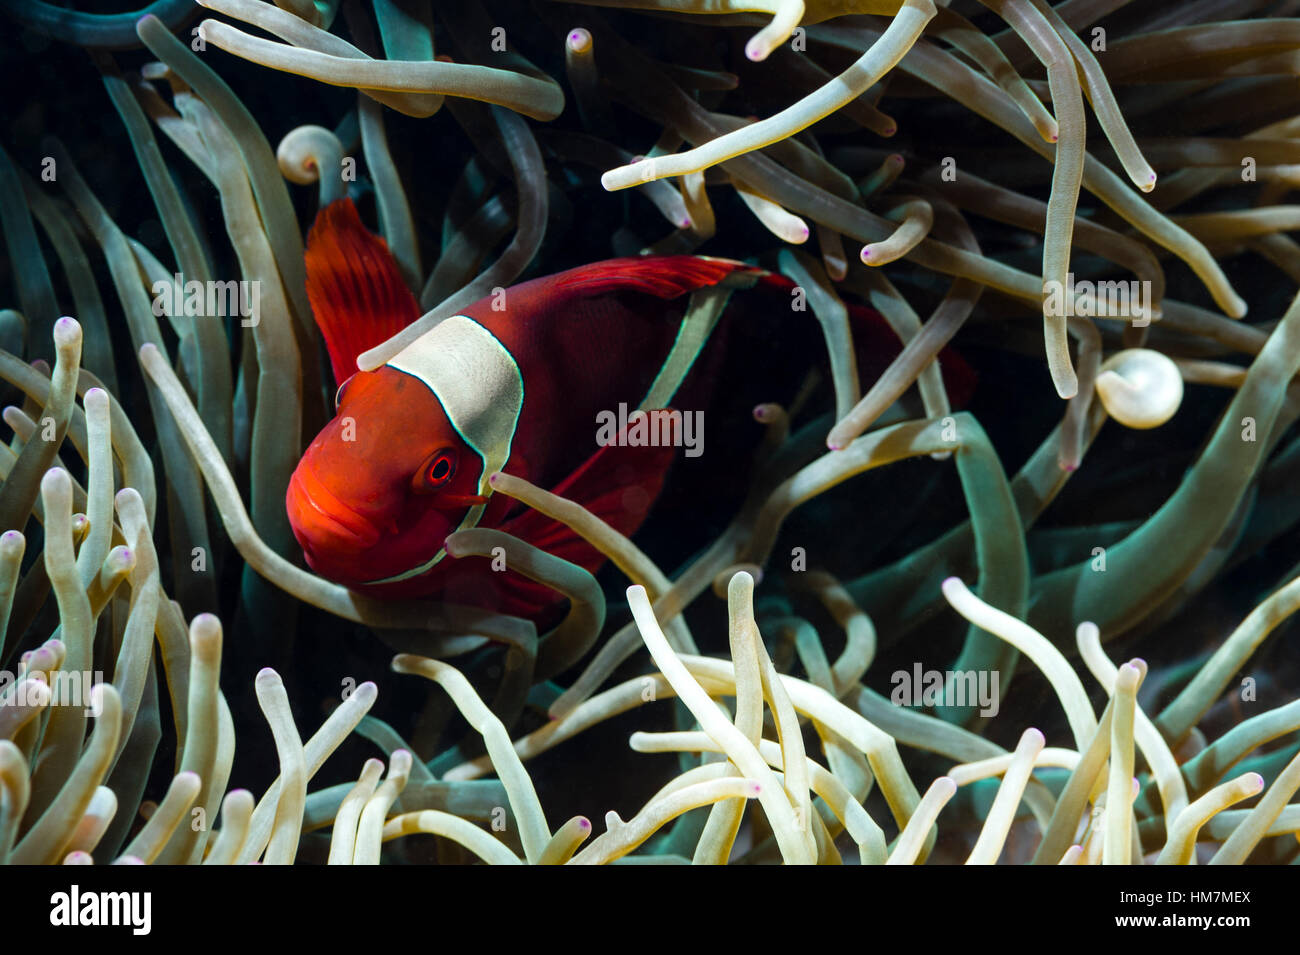 A bright red Spine-cheeked Anemonefish sheltering in the stinging tentacles of an anemone. Stock Photo